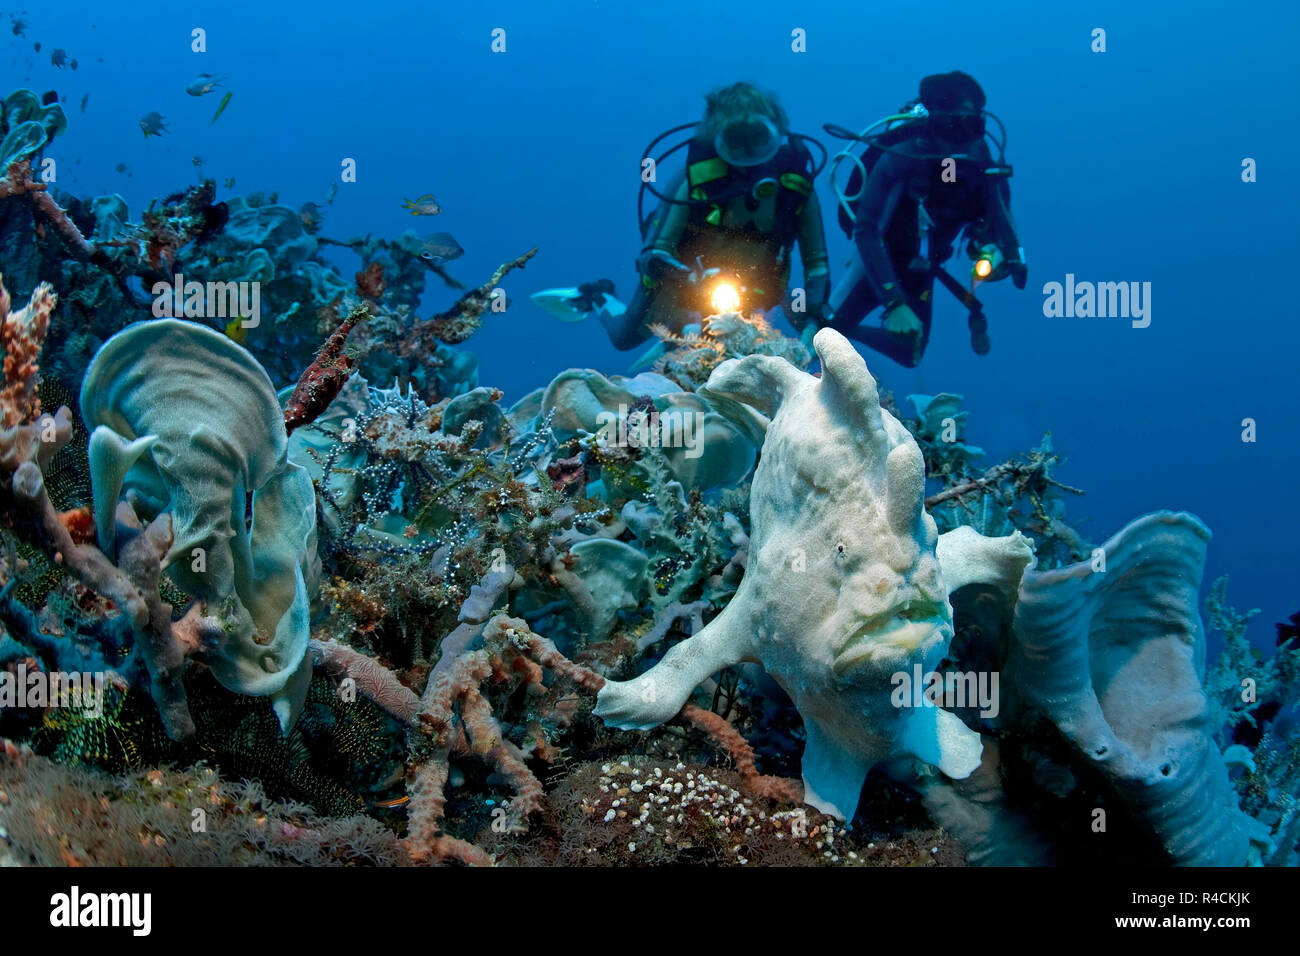 Scuba divers watches a Giant Frogfish, Commerson's Anglerfish or Commerson's Frogfish (Antennarius commersoni), at elephant sponges (Lanthella basta) Stock Photo